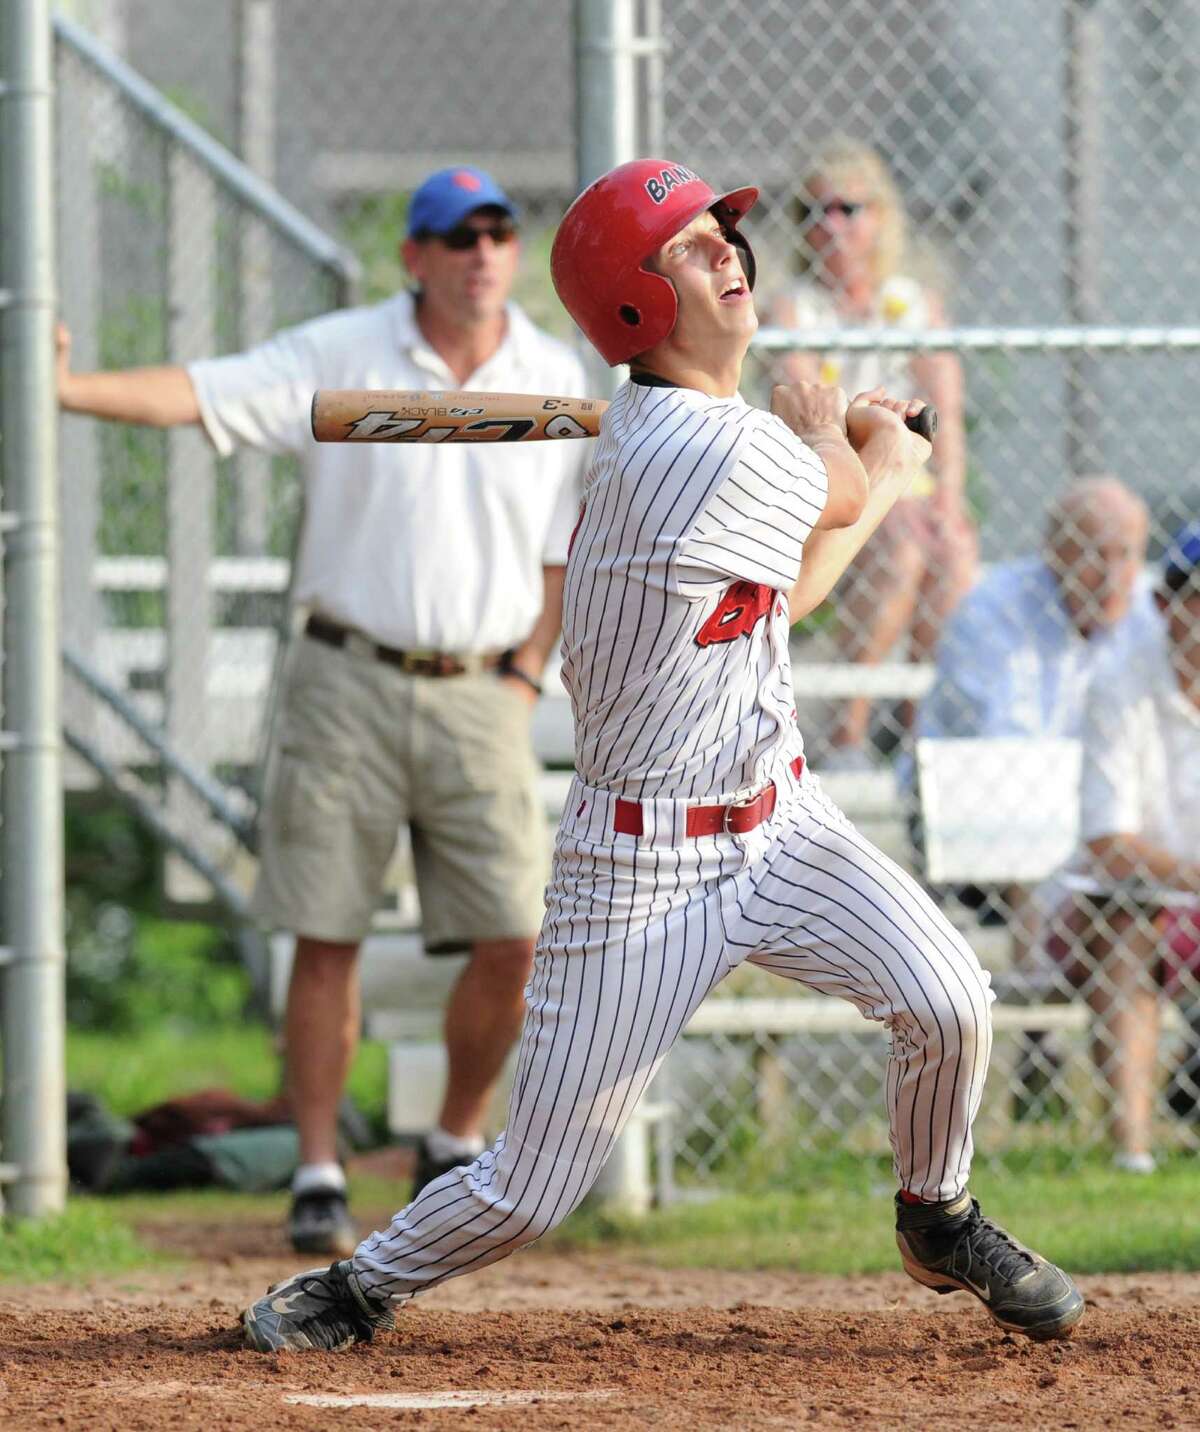 BANC player Matt Condon doubles against Rink & Racquet during Senior Babe Ruth baseball at Havemeyer Field in Greenwich, Thursday, July 11, 2013.